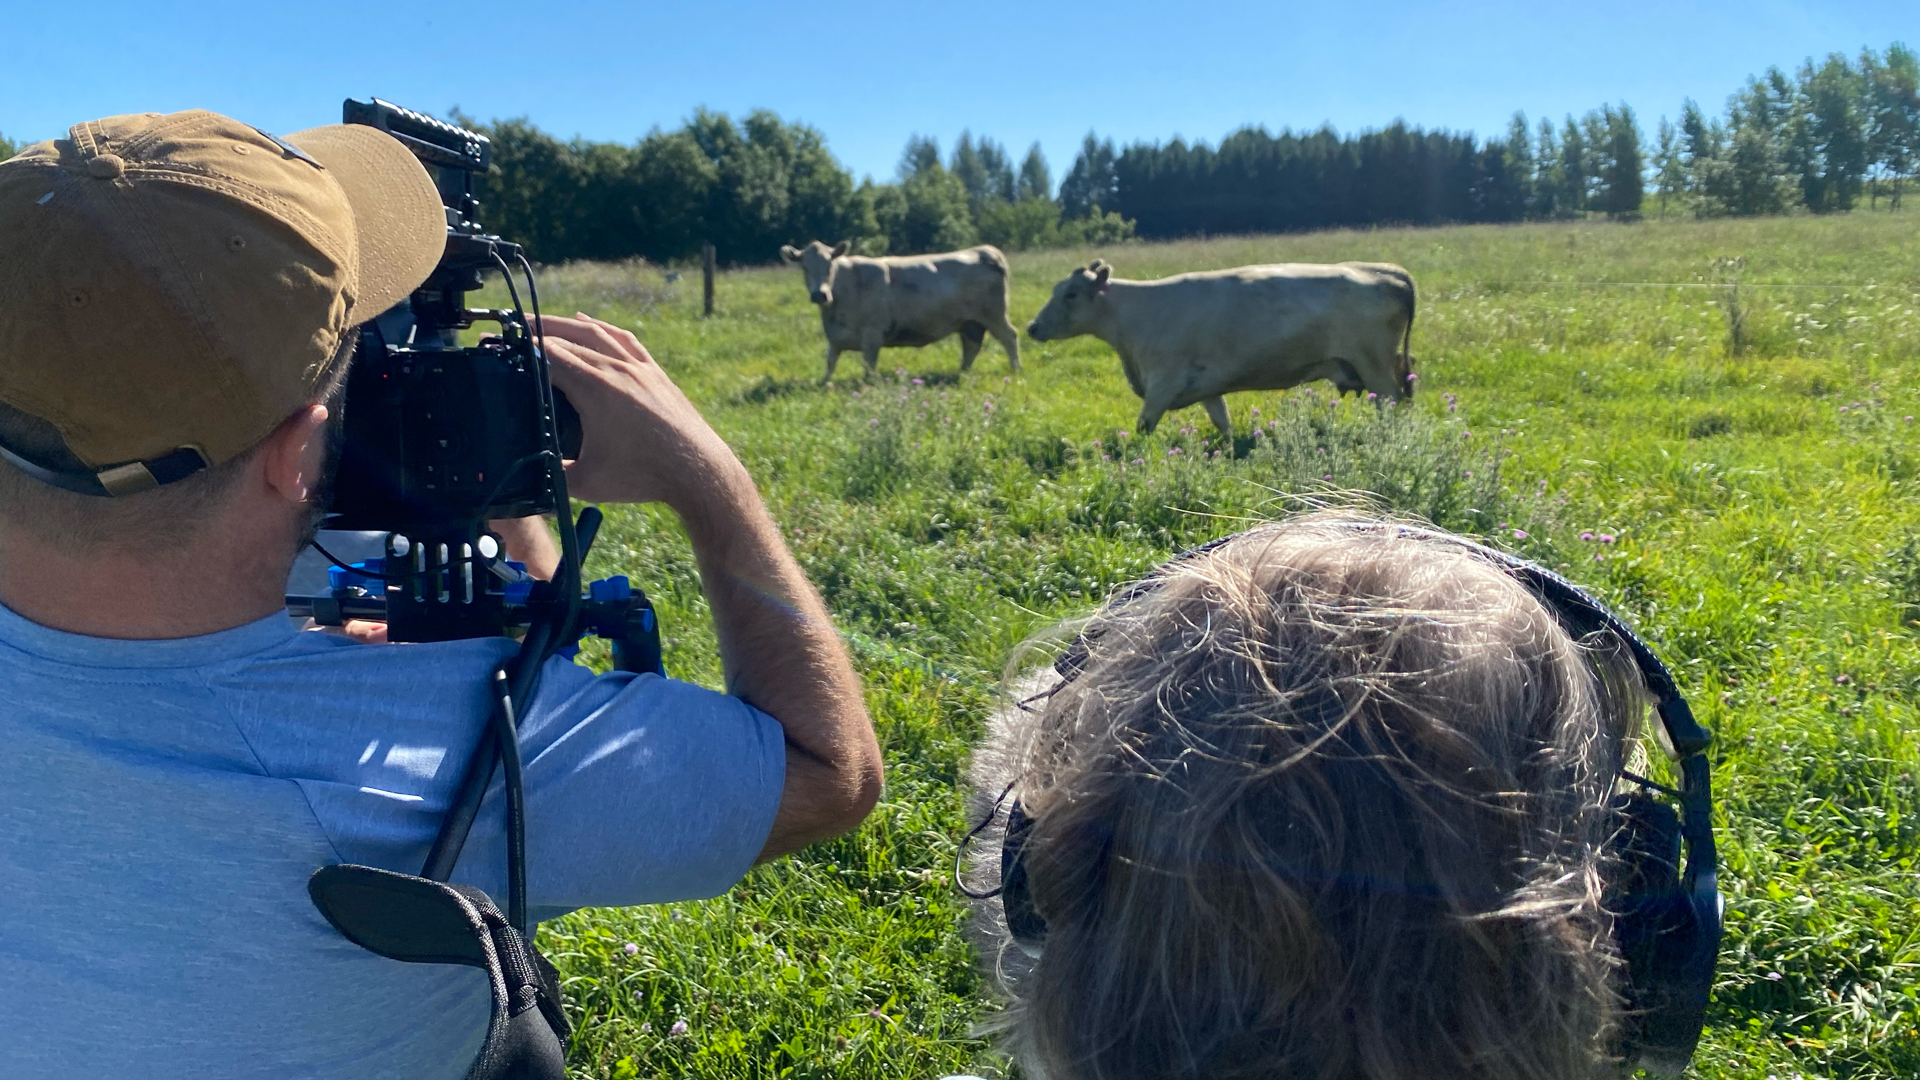 A camera and sound person capture footage of cows in a field